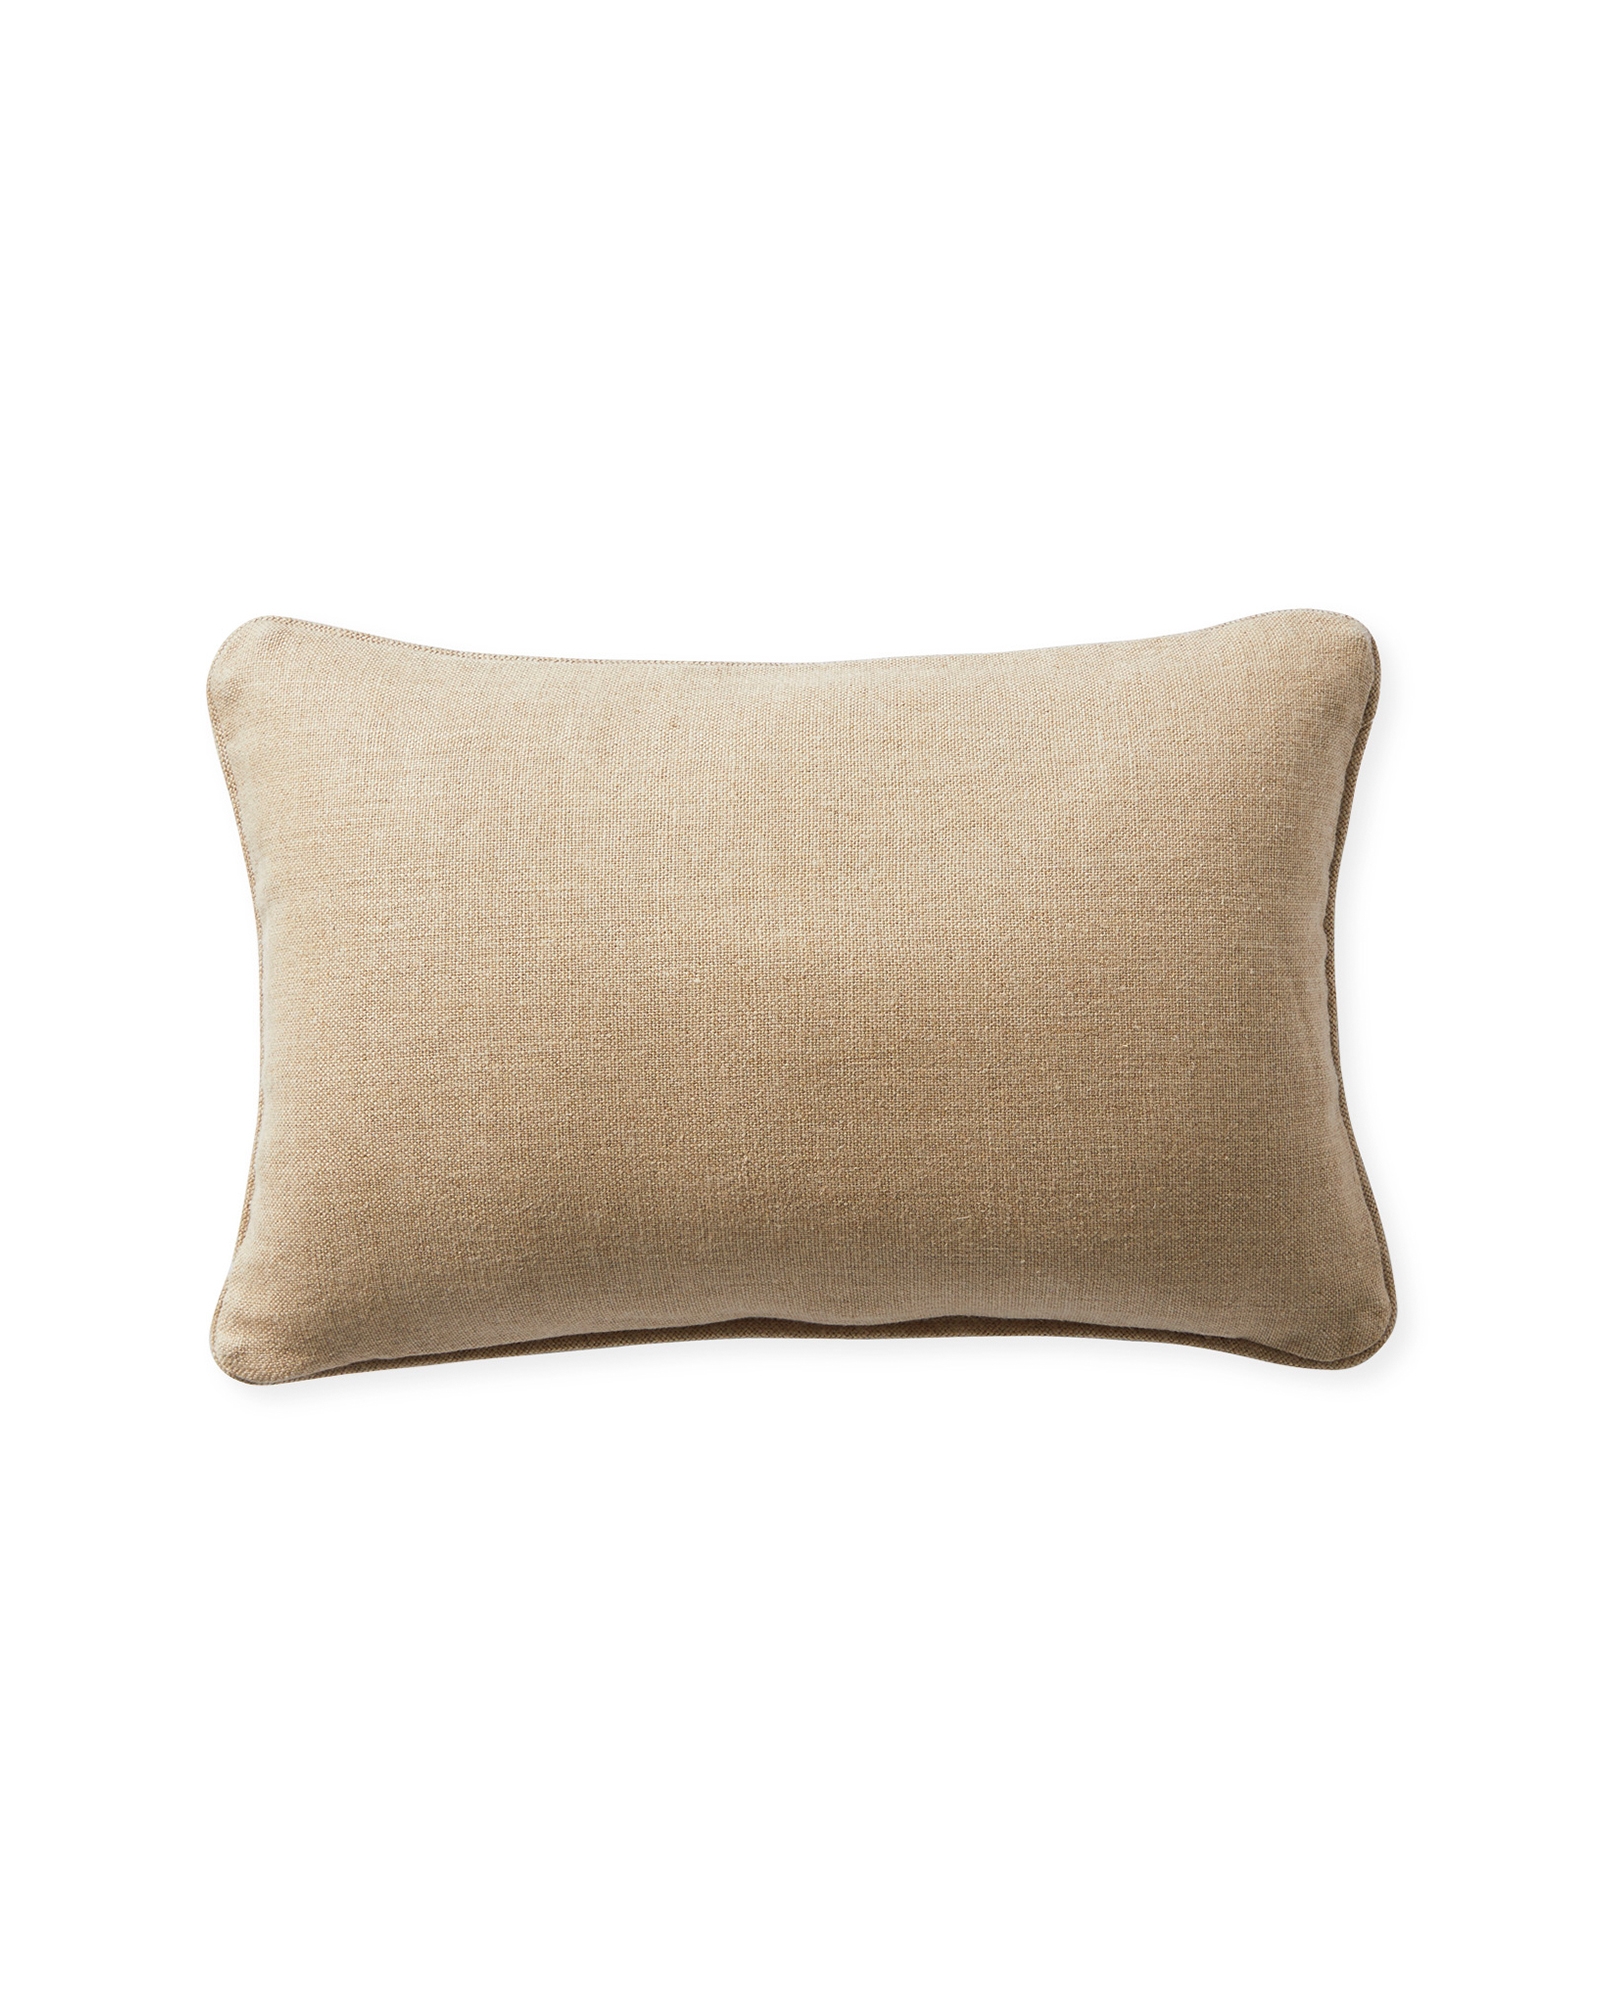 Leather 12" x 18" Pillow Cover - Evergreen - Insert sold separately - Image 1